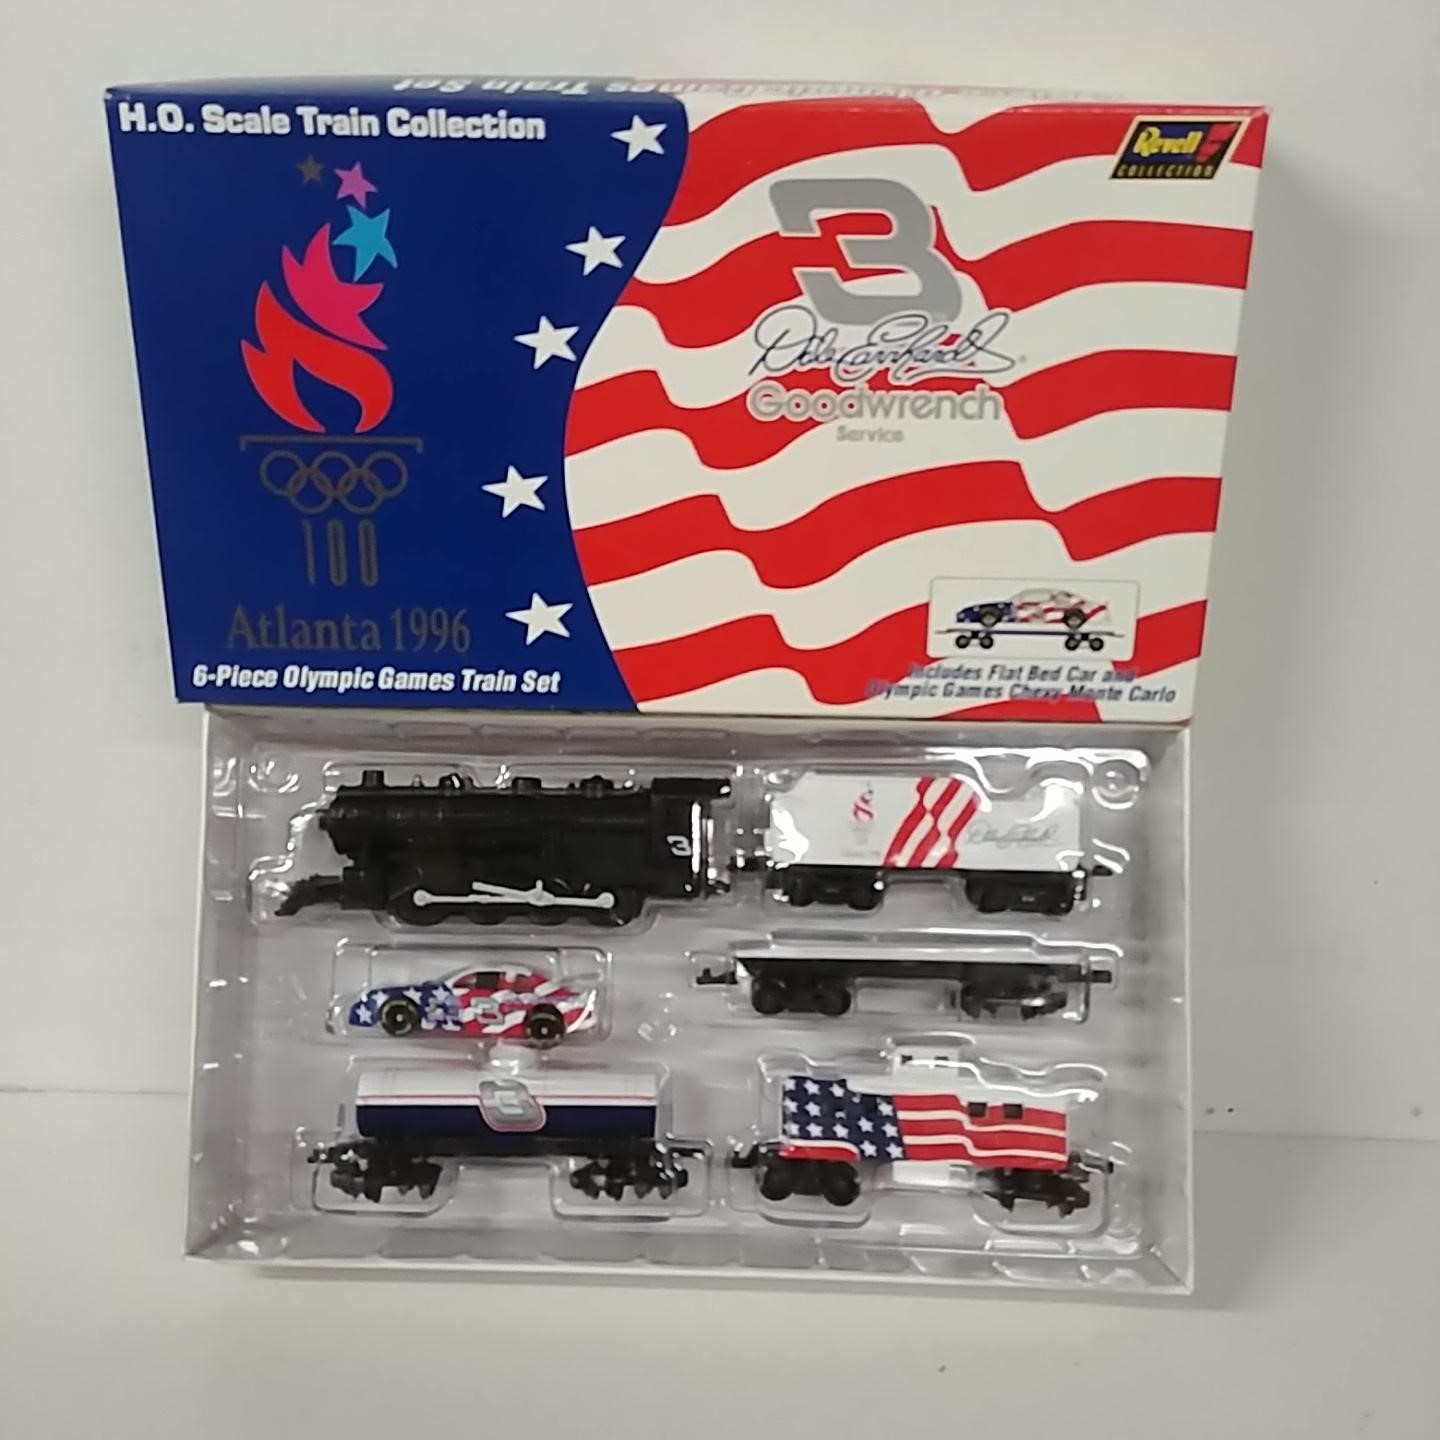 1996 Dale Earnhardt 1/64th Goodwrench "Olympics" Revell 6 piece train set